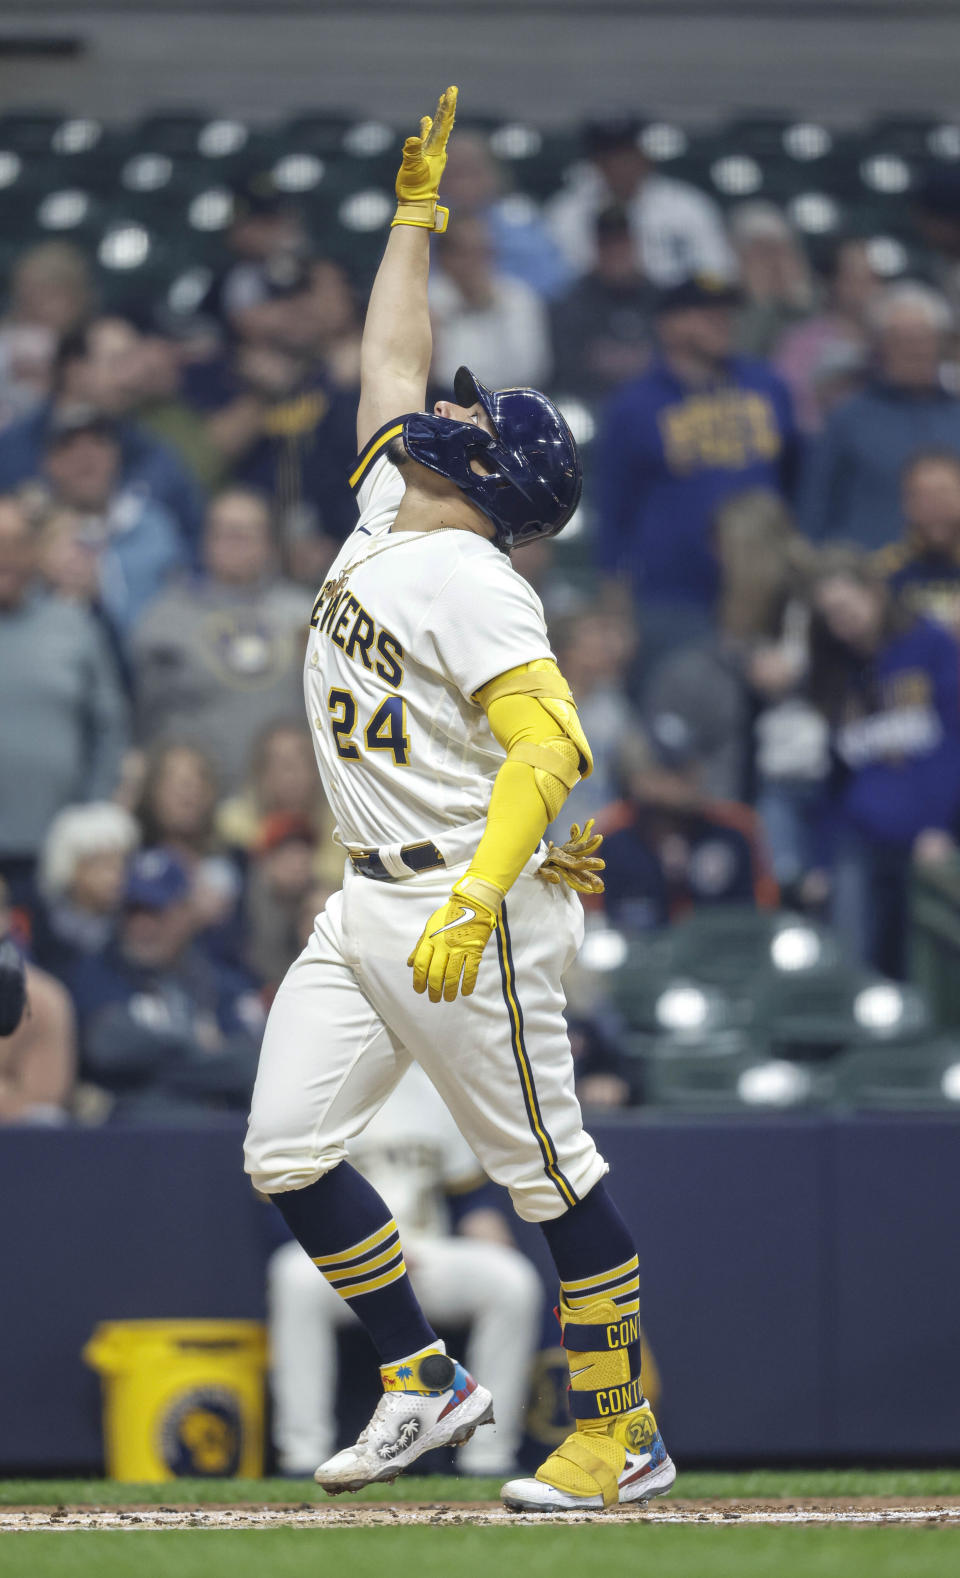 Milwaukee Brewers' William Contreras reacts after his home run against the Detroit Tigers during the first inning of a baseball game Monday, April 24, 2023, in Milwaukee. (AP Photo/Jeffrey Phelps)